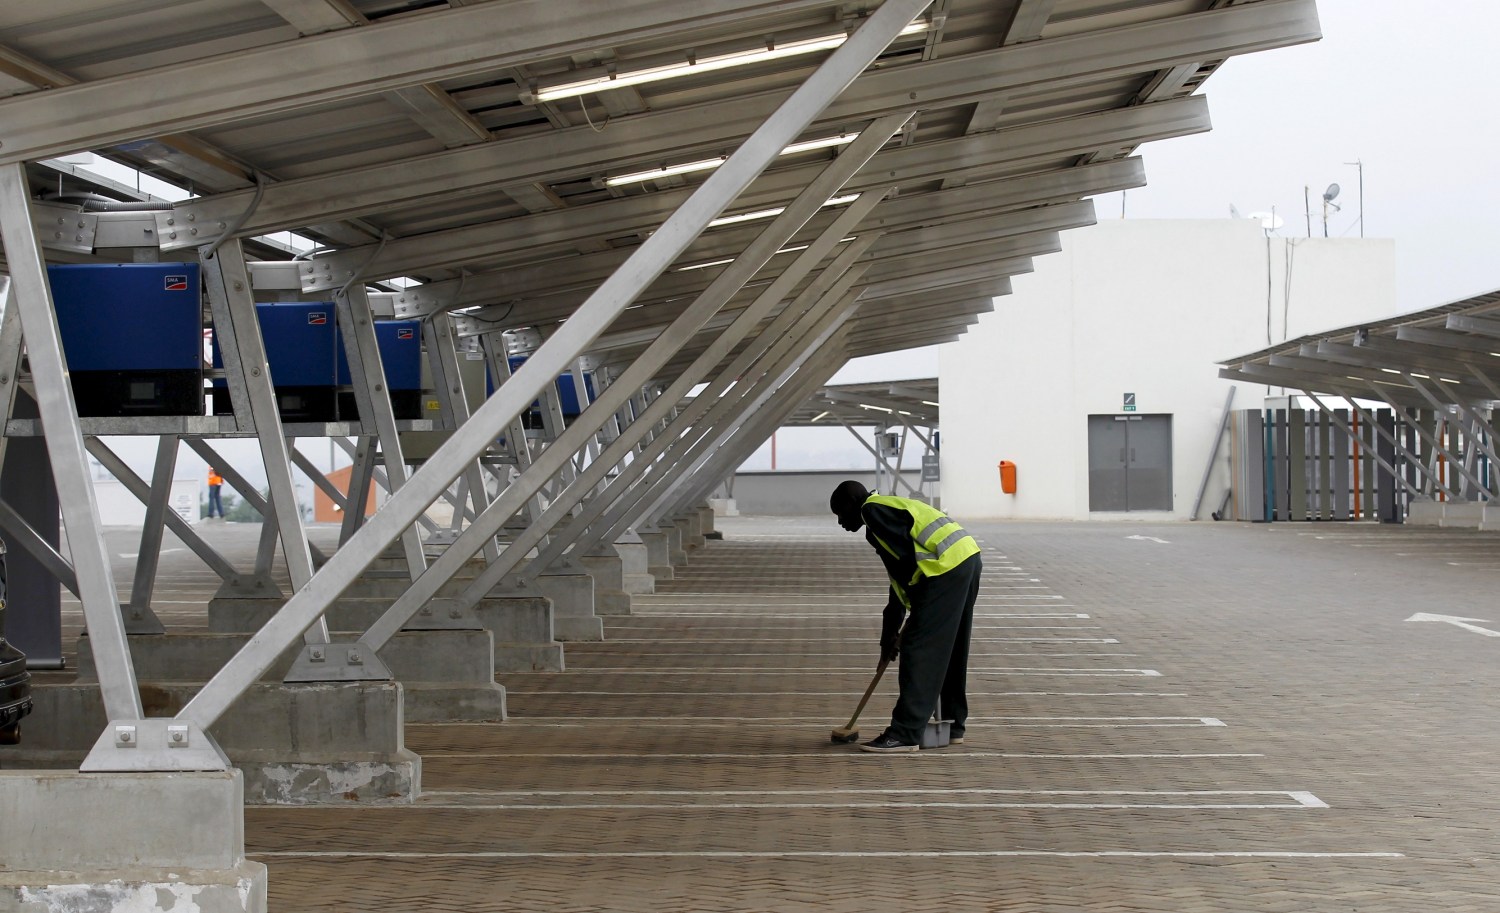 A worker sweeps the floor under solar panels which provide shade for vehicles at a solar carport at the Garden City shopping mall in Kenya's capital Nairobi, September 15, 2015. The Africa's largest solar carport with 3,300 solar panels will generate 1256 MWh annually and cut carbon emission by around 745 tonnes per year, according to Solarcentury and Solar Africa.  REUTERS/Thomas Mukoya - GF10000206552